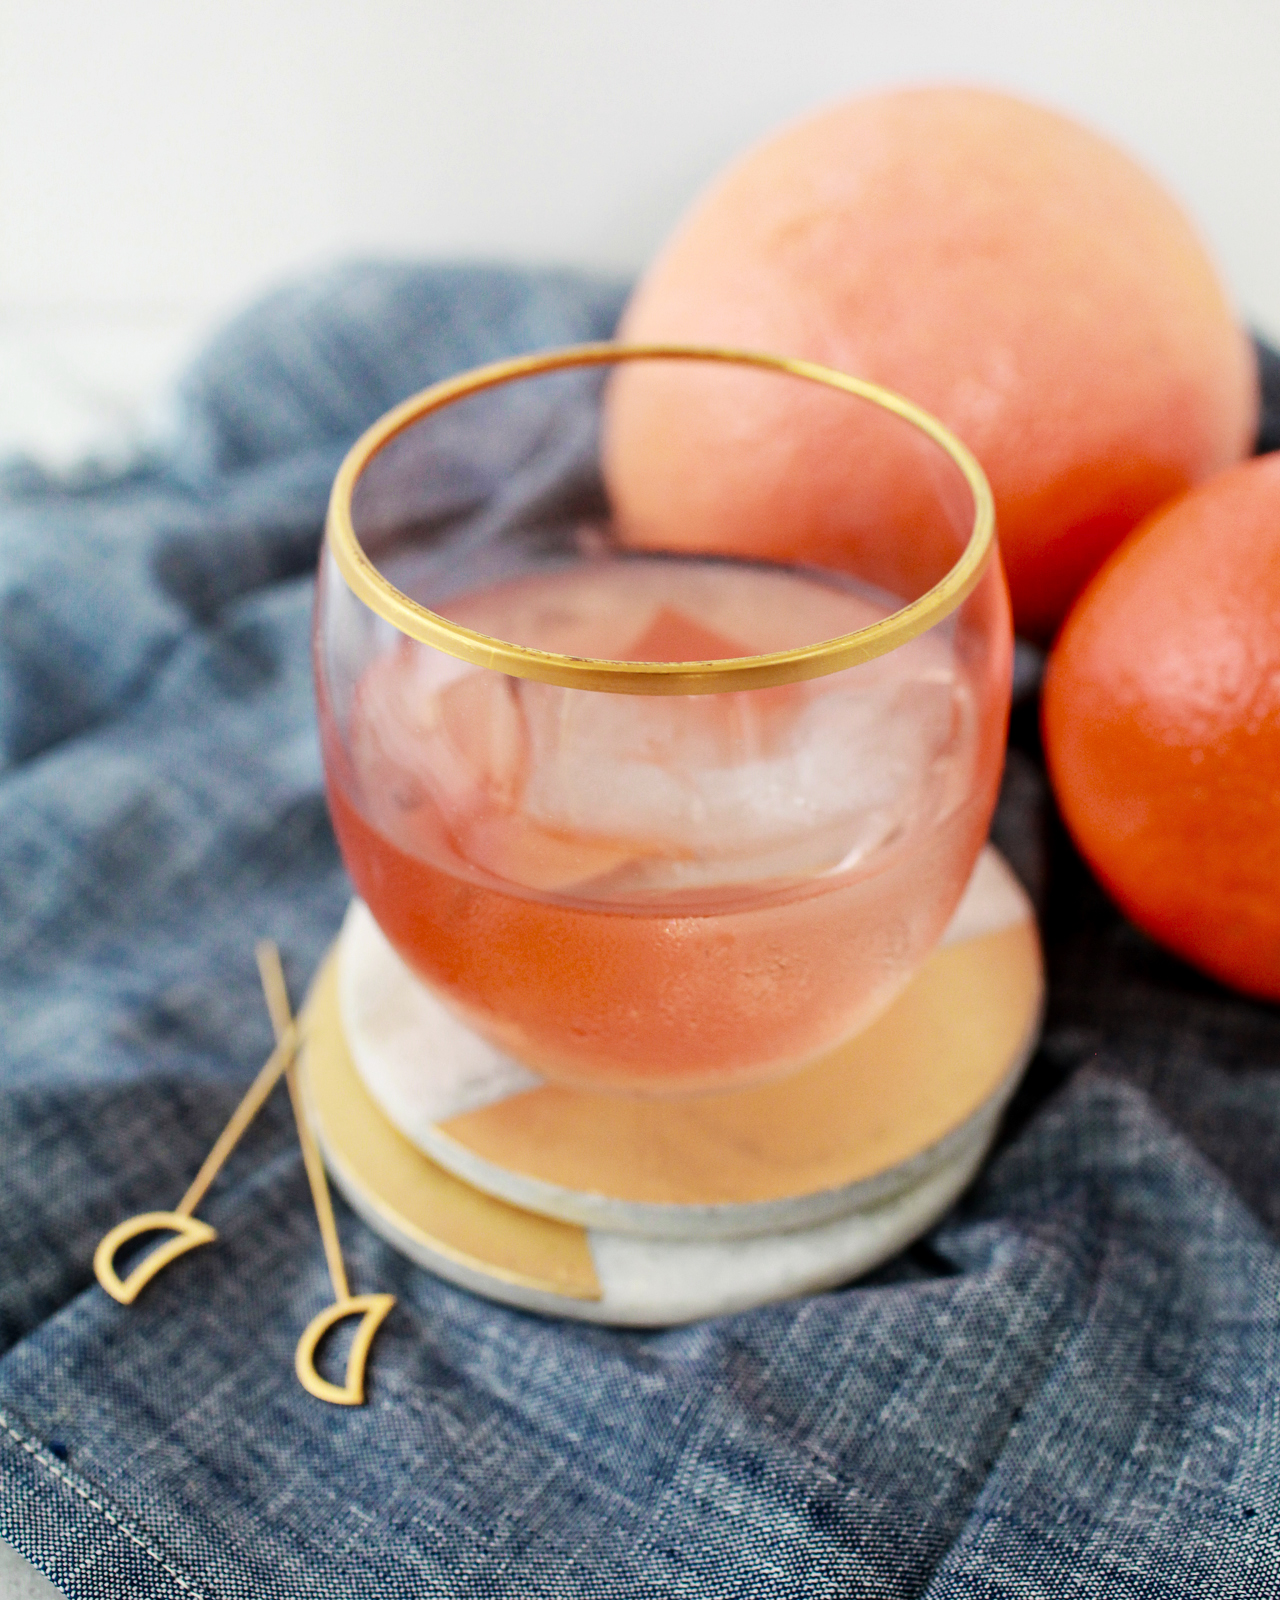 A Tequila and Mezcal Old Fashioned Cocktail Recipe